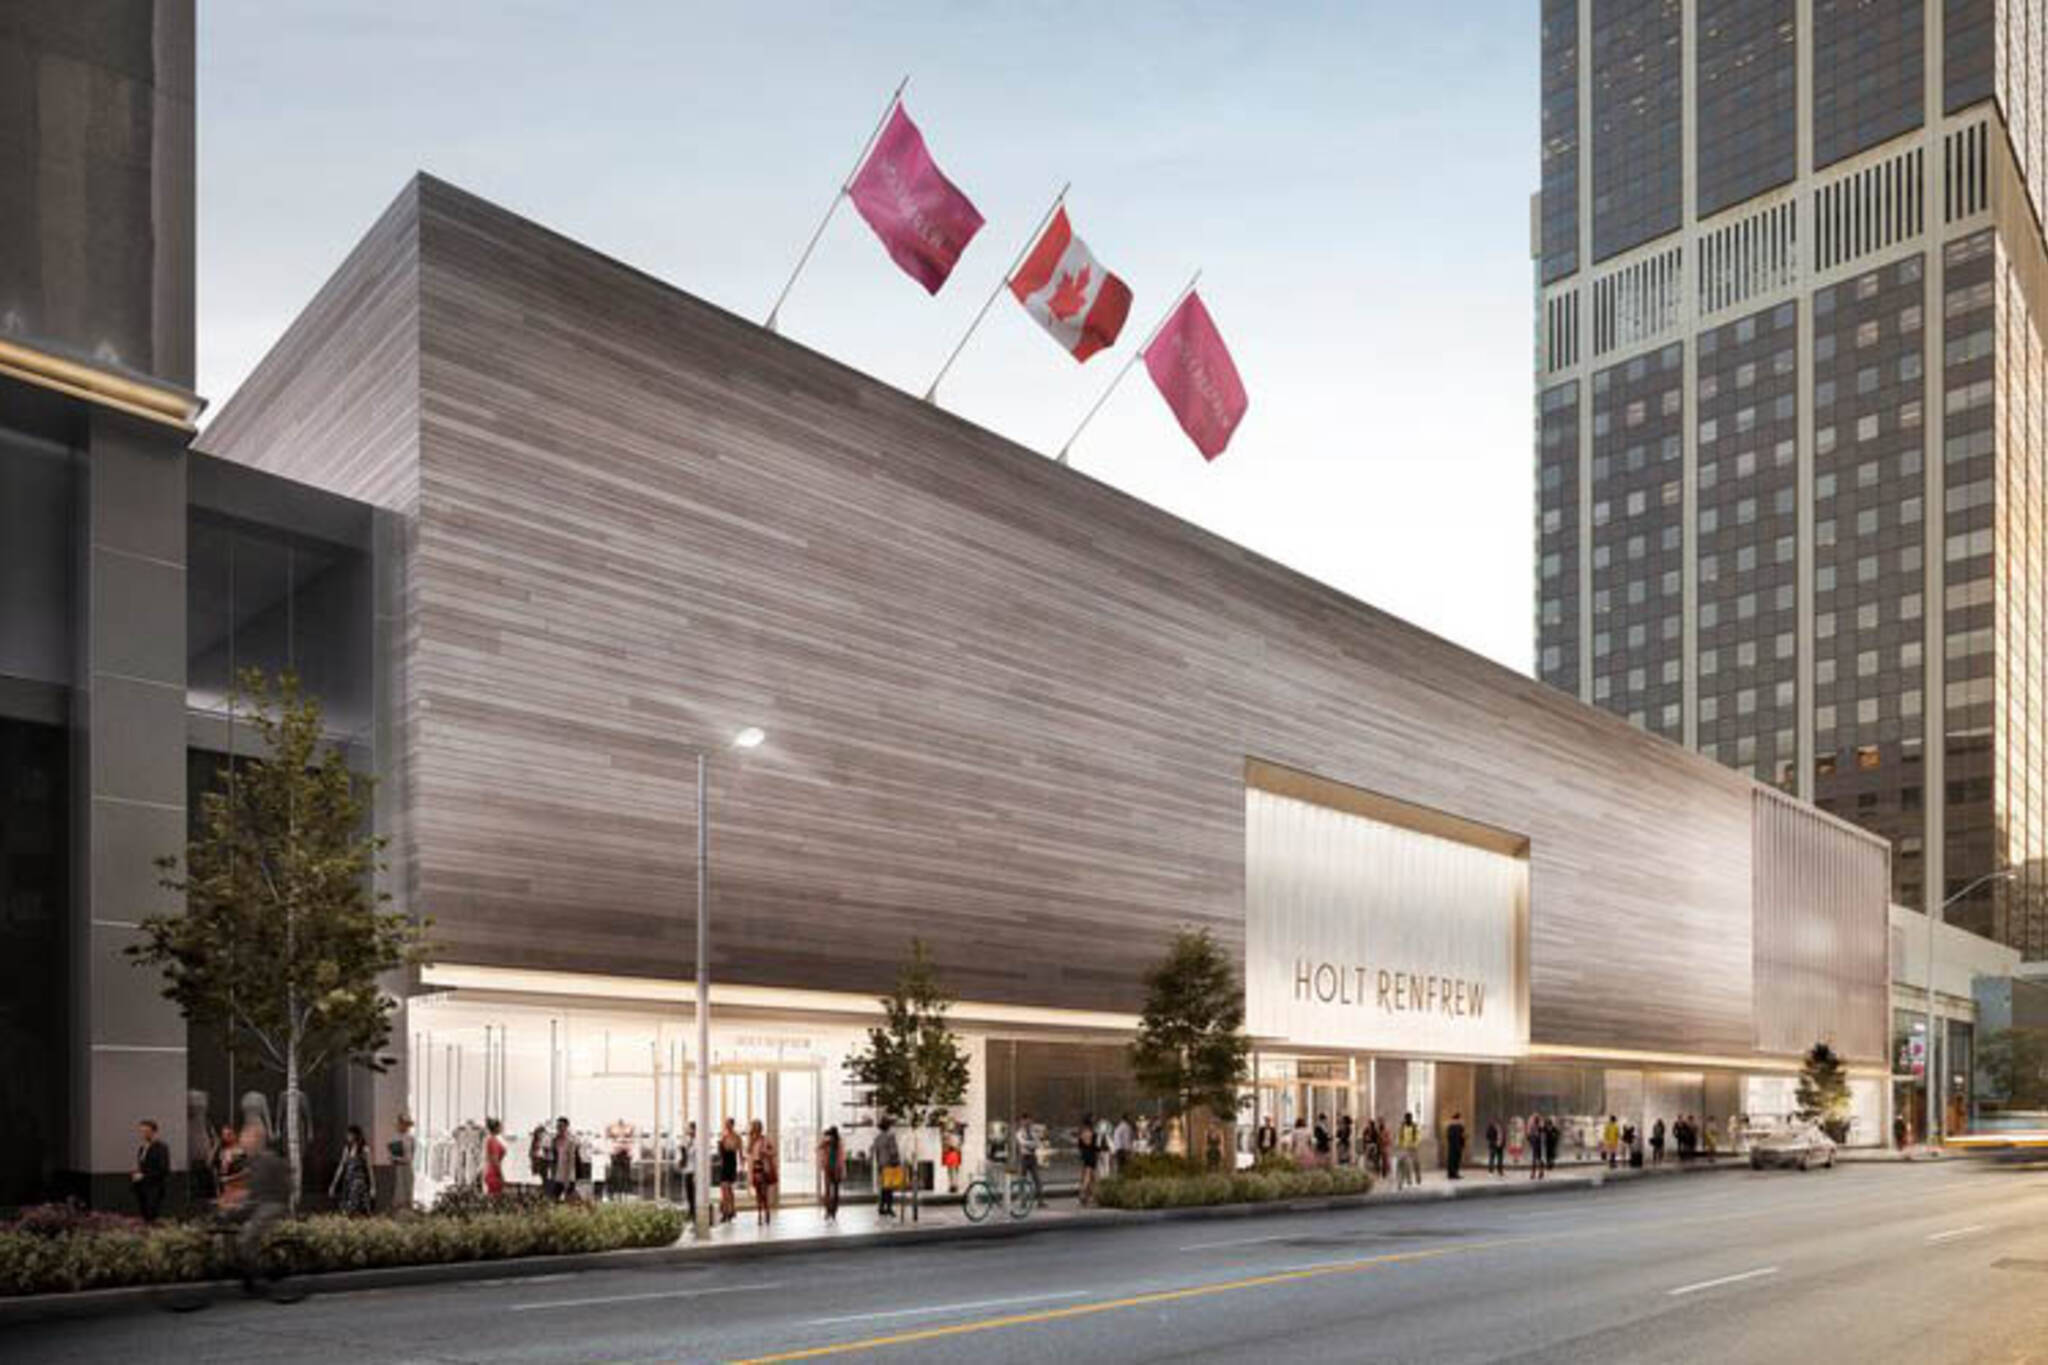 Here's what the renovated Holt Renfrew on Bloor St. will look like